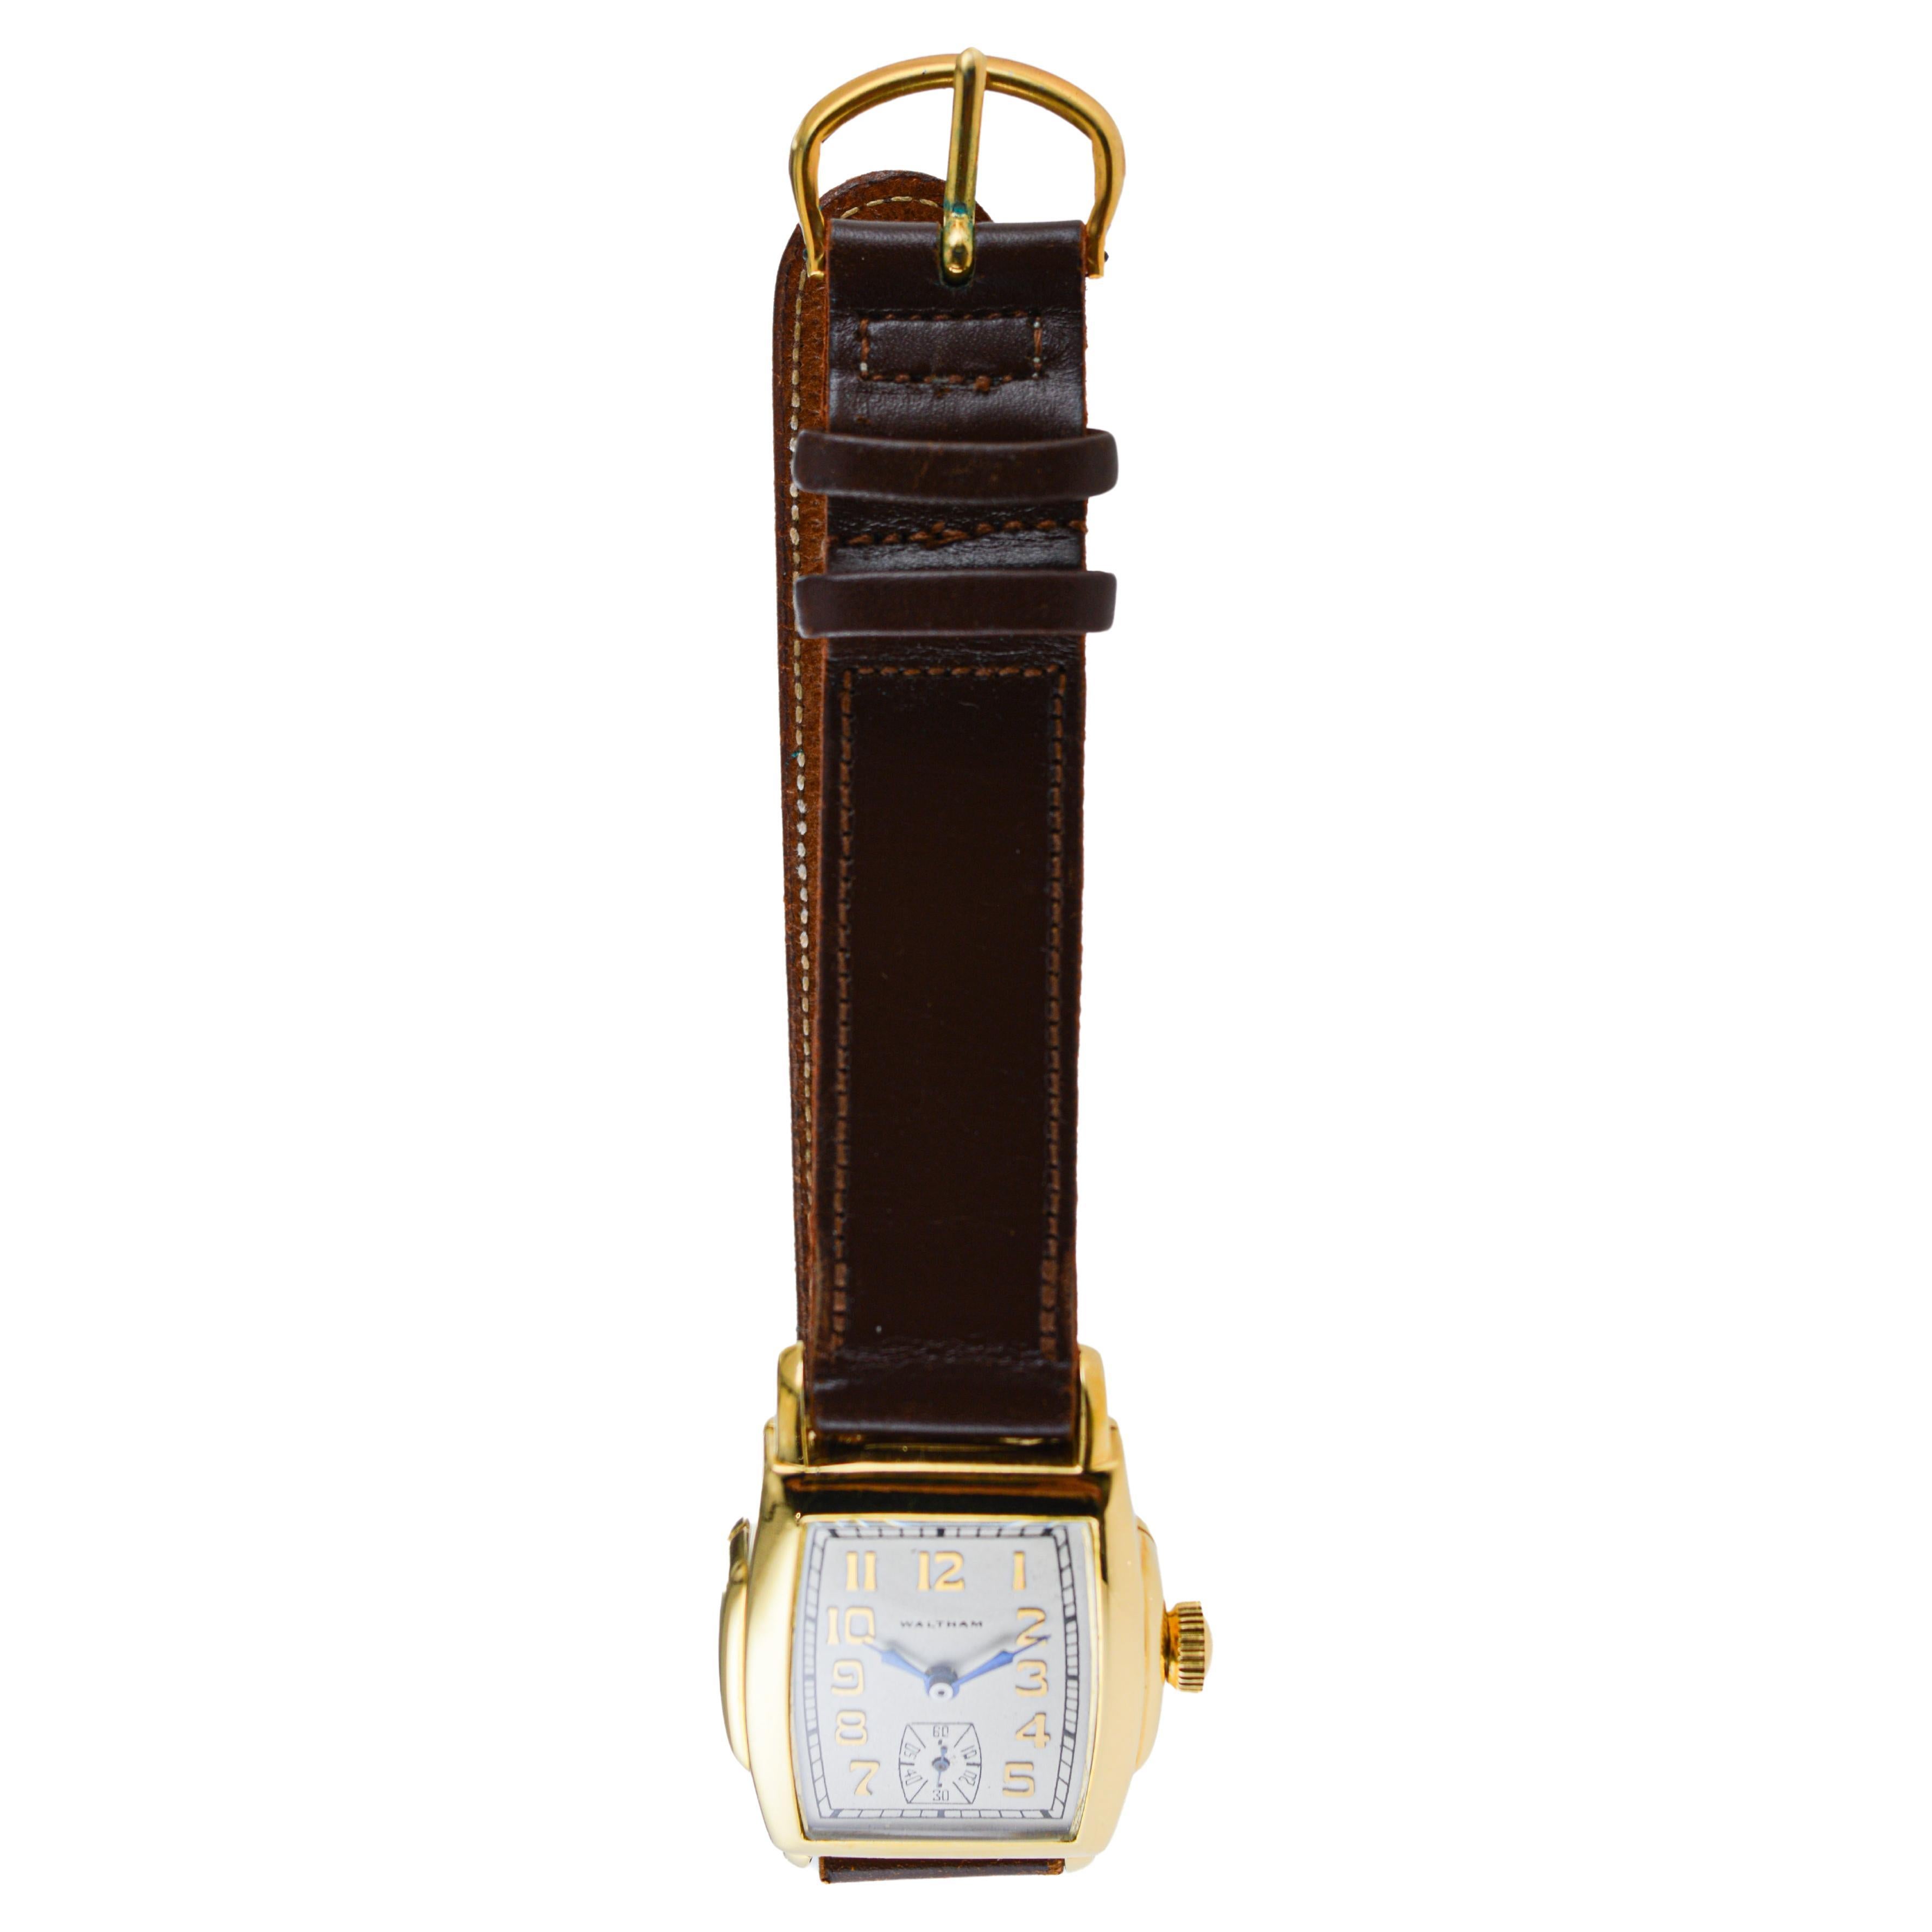 FACTORY / HOUSE: Waltham Watch Company
STYLE / REFERENCE: Art Deco / Tonneau Shape 
METAL / MATERIAL: Yellow Gold Filled
CIRCA / YEAR: 1920's
DIMENSIONS / SIZE: Length 41mm X Width 28mm
MOVEMENT / CALIBER: Manual Winding / 21 Jewels / Caliber